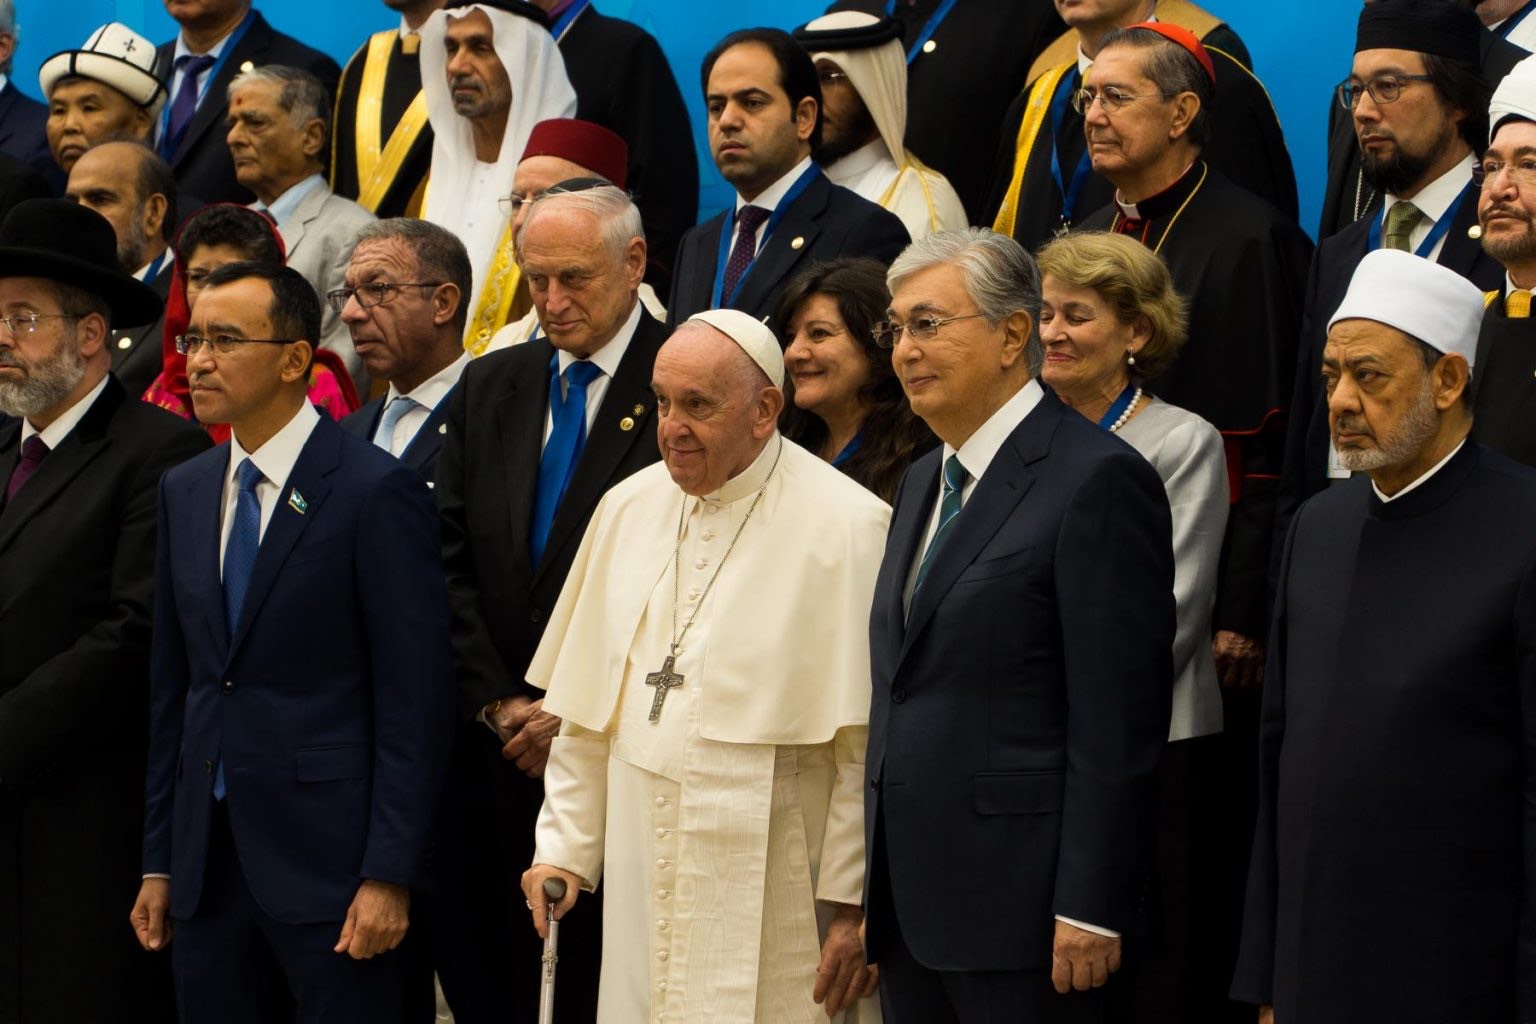 Visiting Astana through the eyes of the Pope